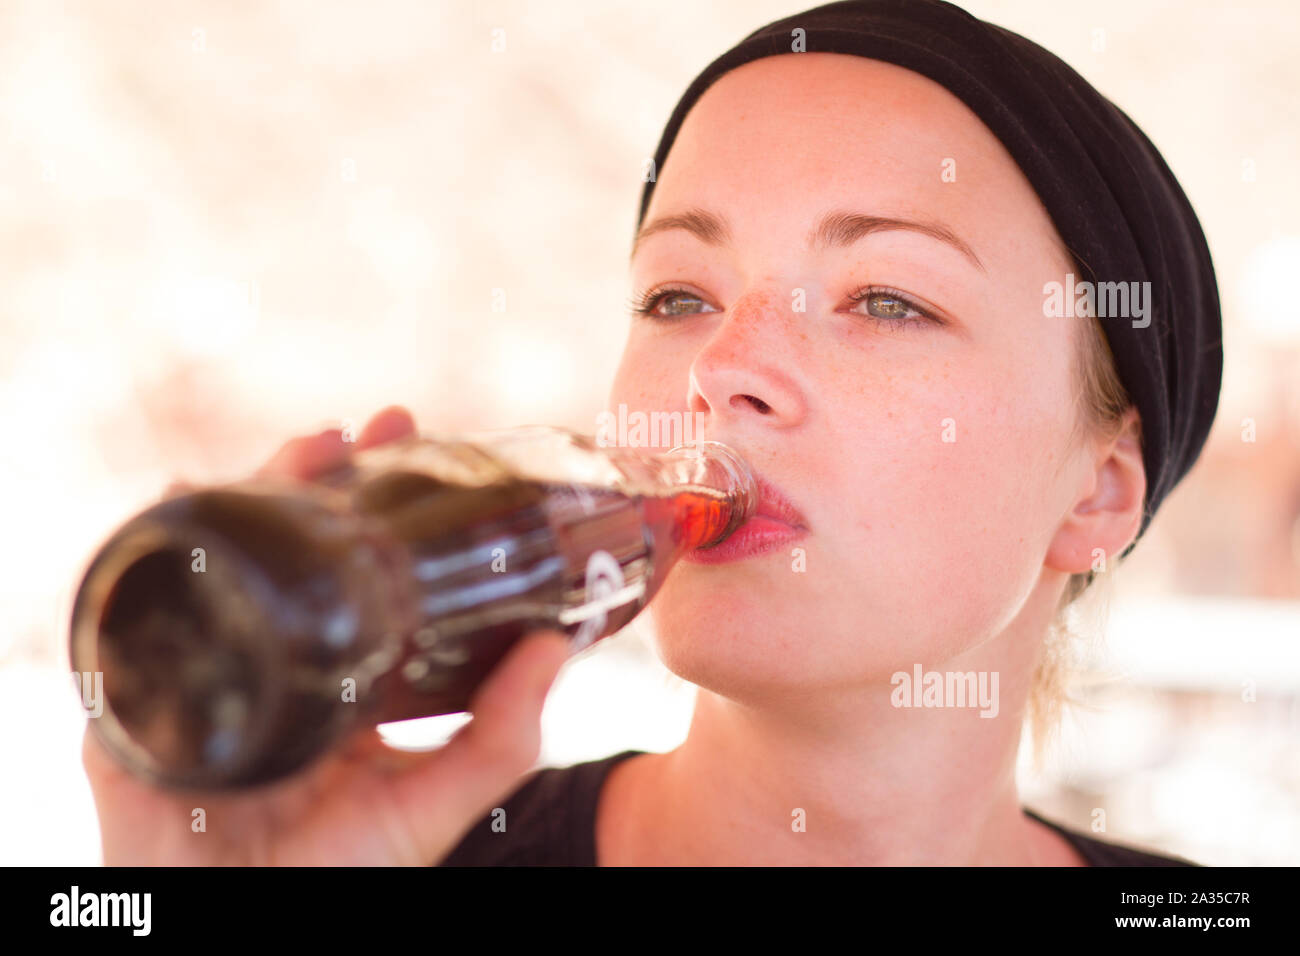 Woman drinking Coca Cola from brand's retro bottle on October the 1th, 2013 in Marrakech, Morocco. Coca Cola is the brand of most famous soft drink in Stock Photo